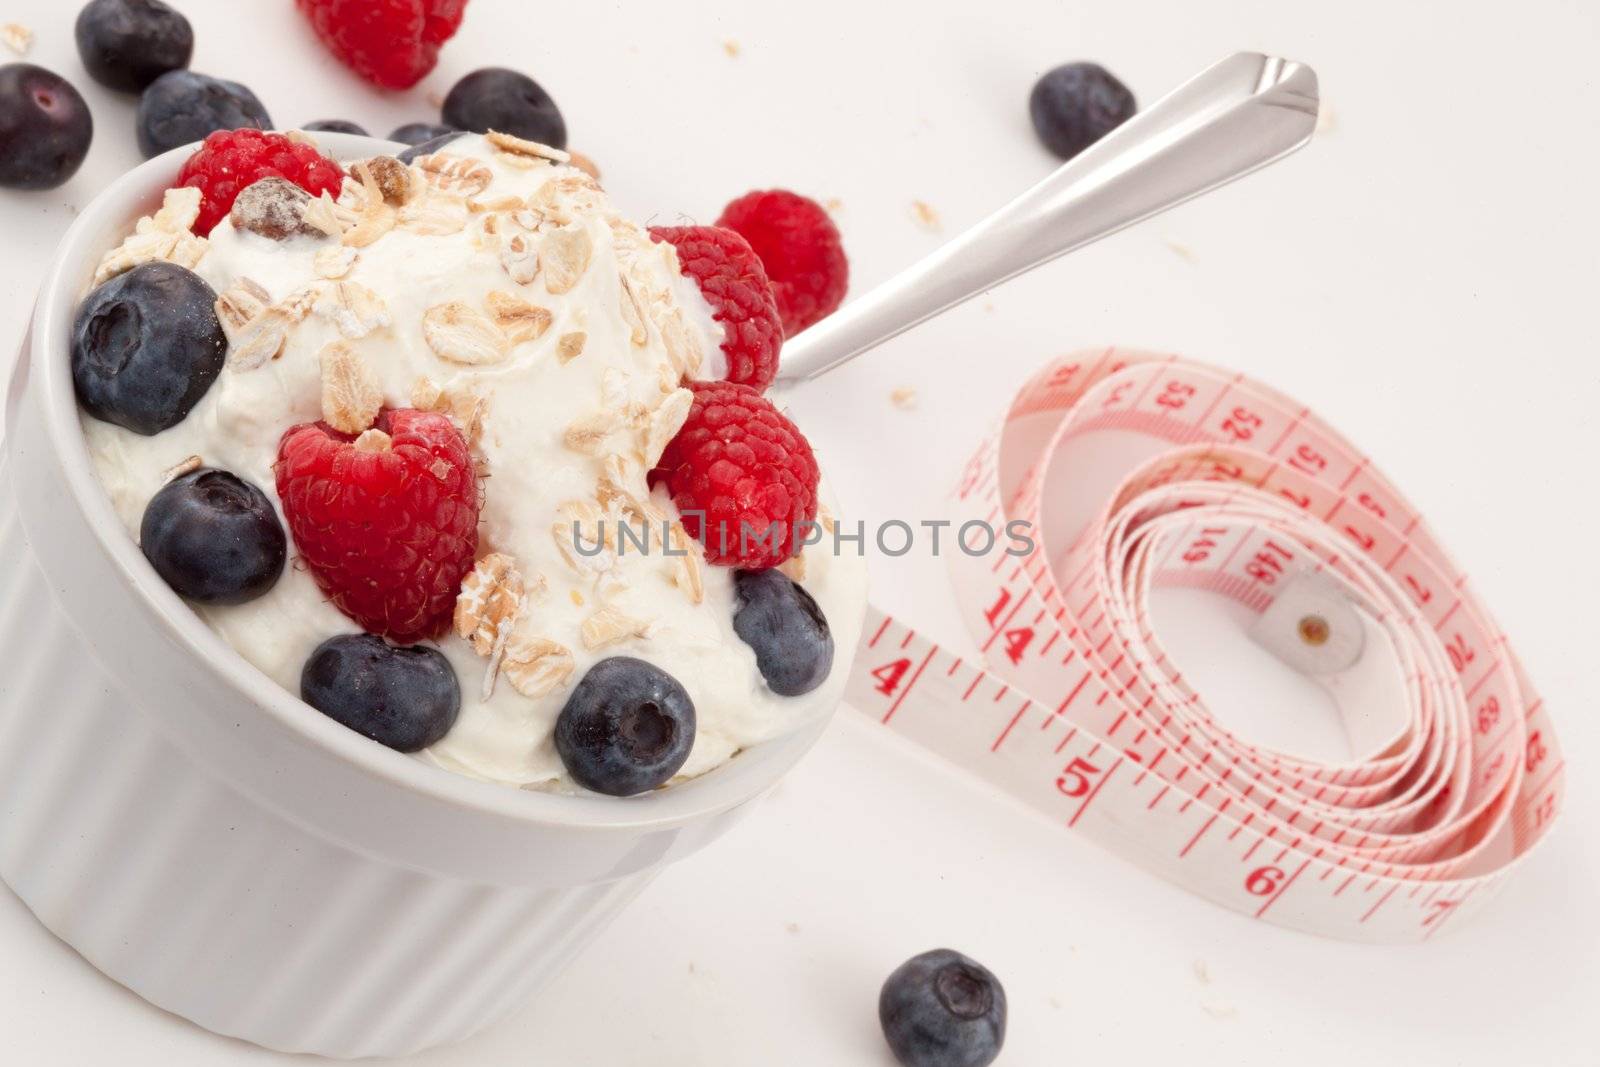 Jar of fruits and whipped cream with spoon and tape measure  by Wavebreakmedia